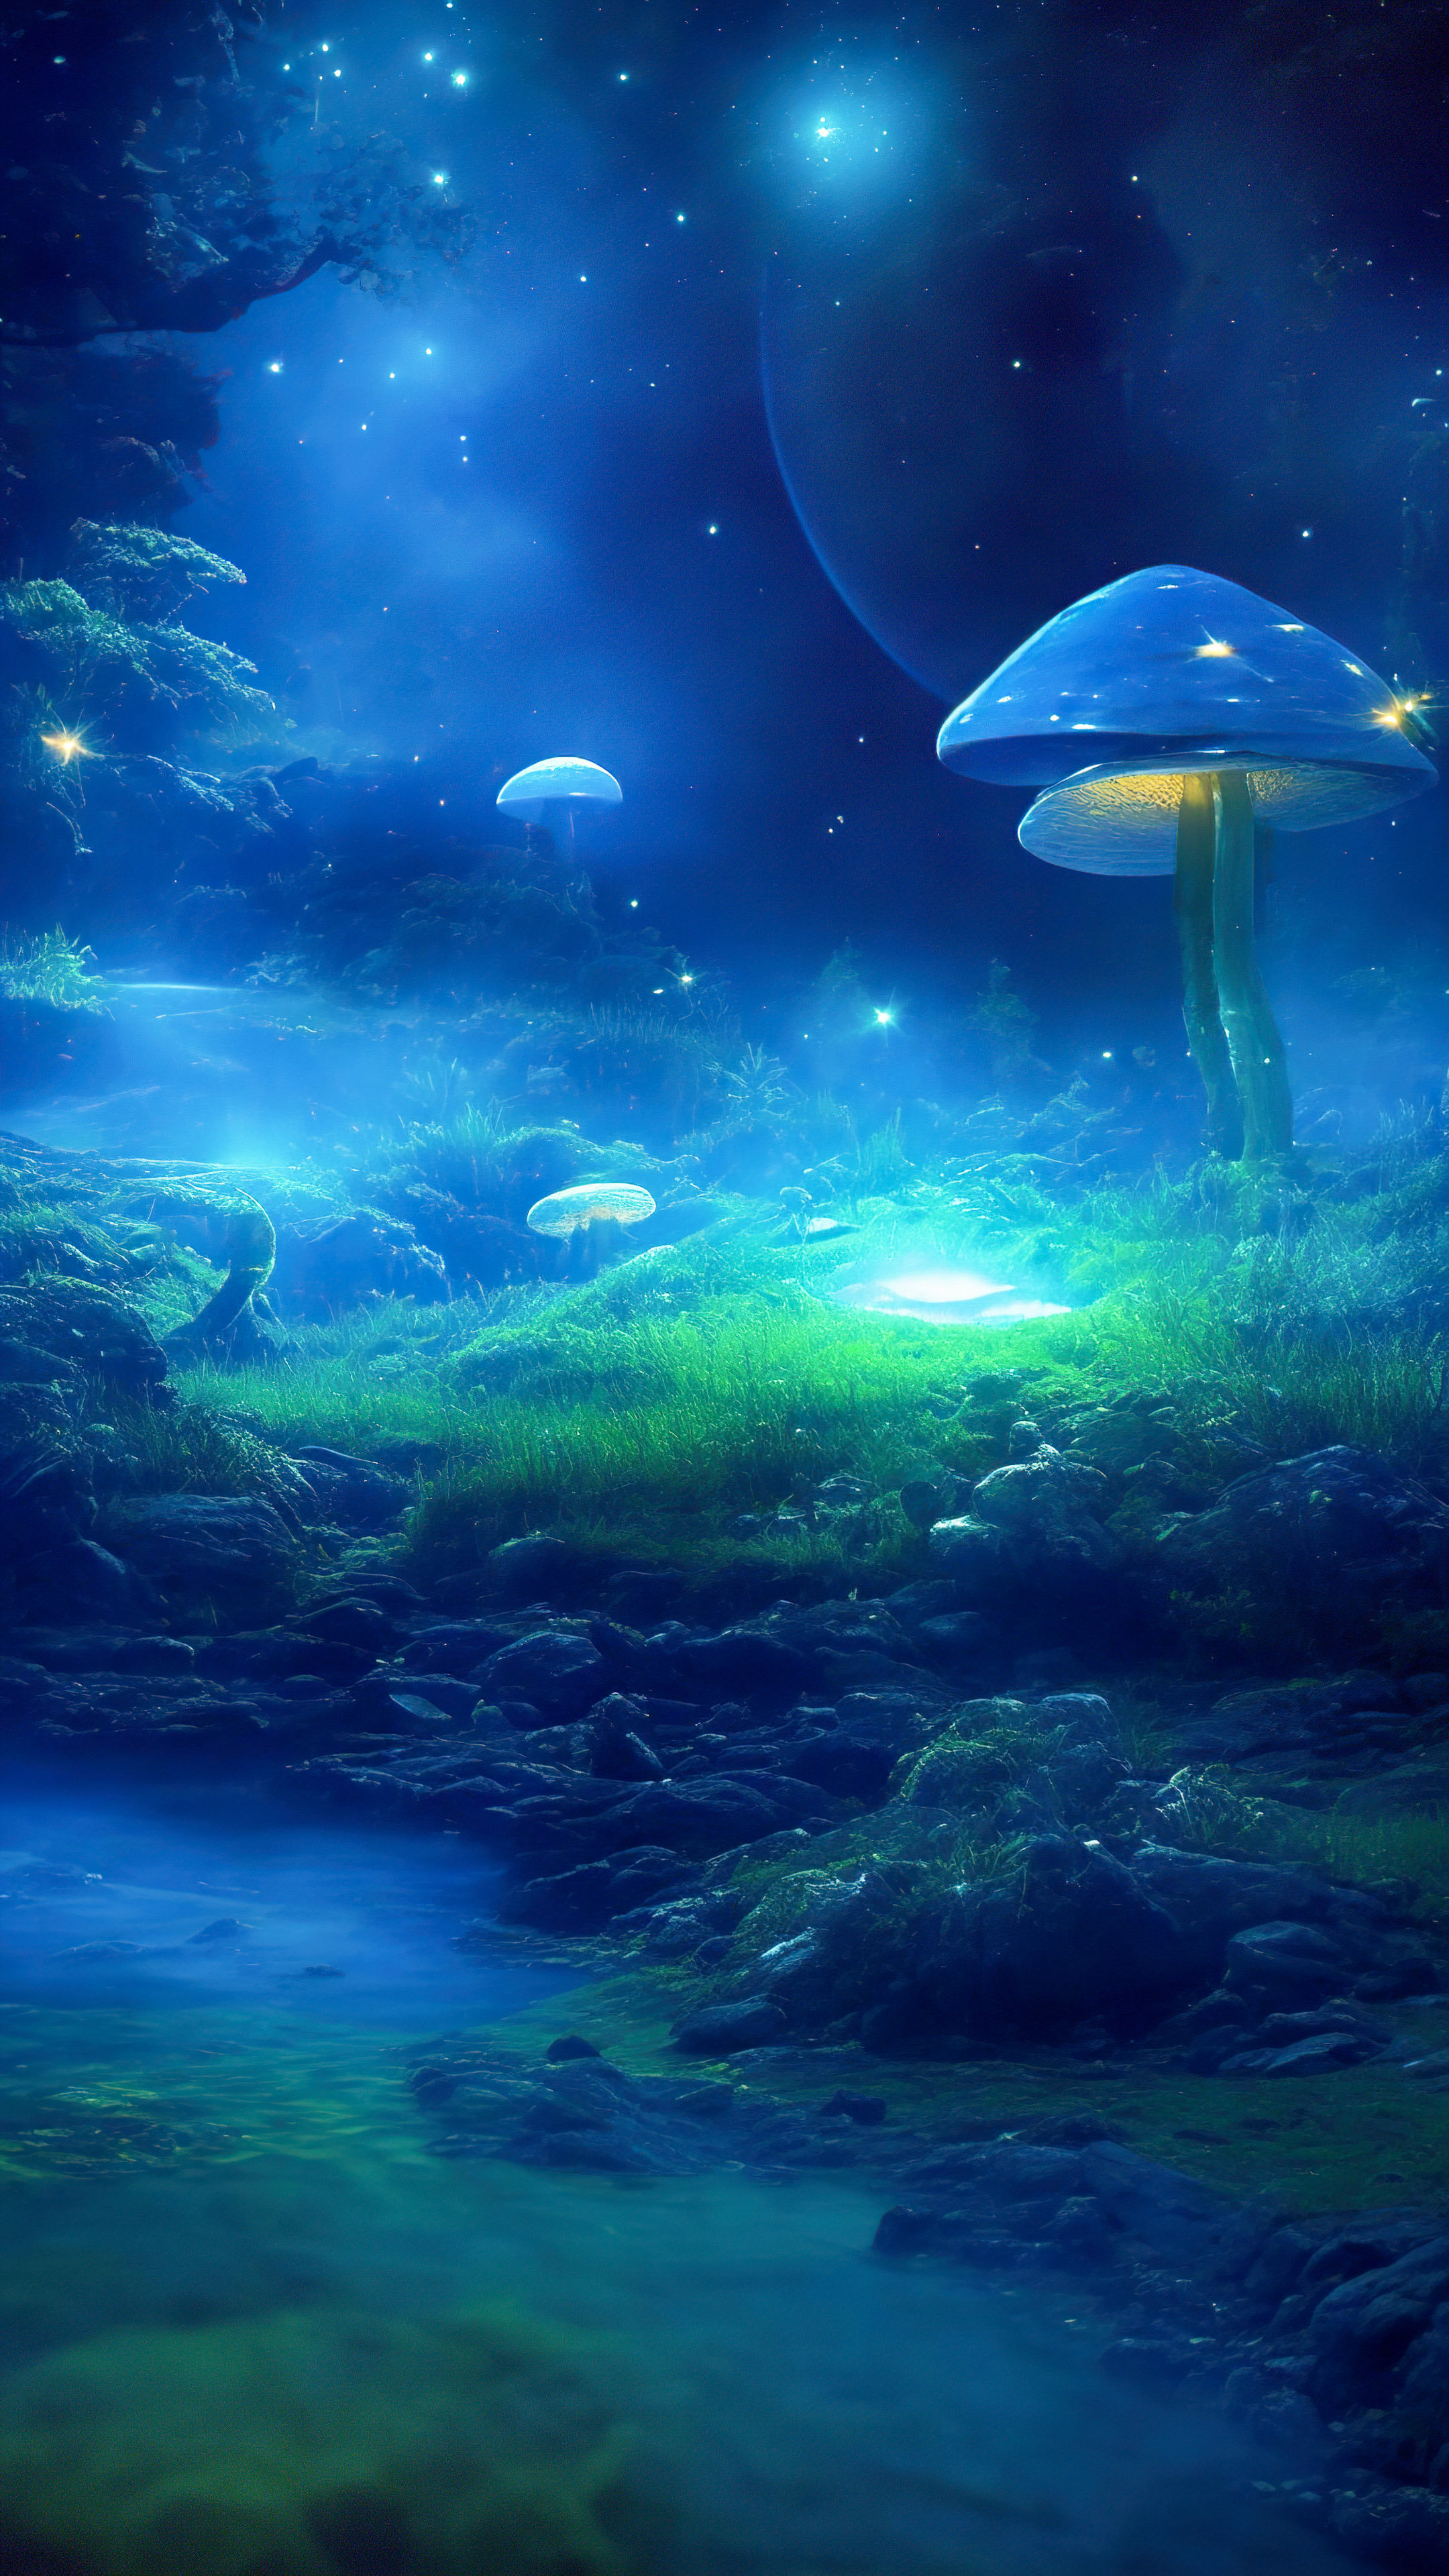 Discover our midnight wallpaper, illustrating a mystical glen with bioluminescent mushrooms, creating an enchanting, otherworldly scene.